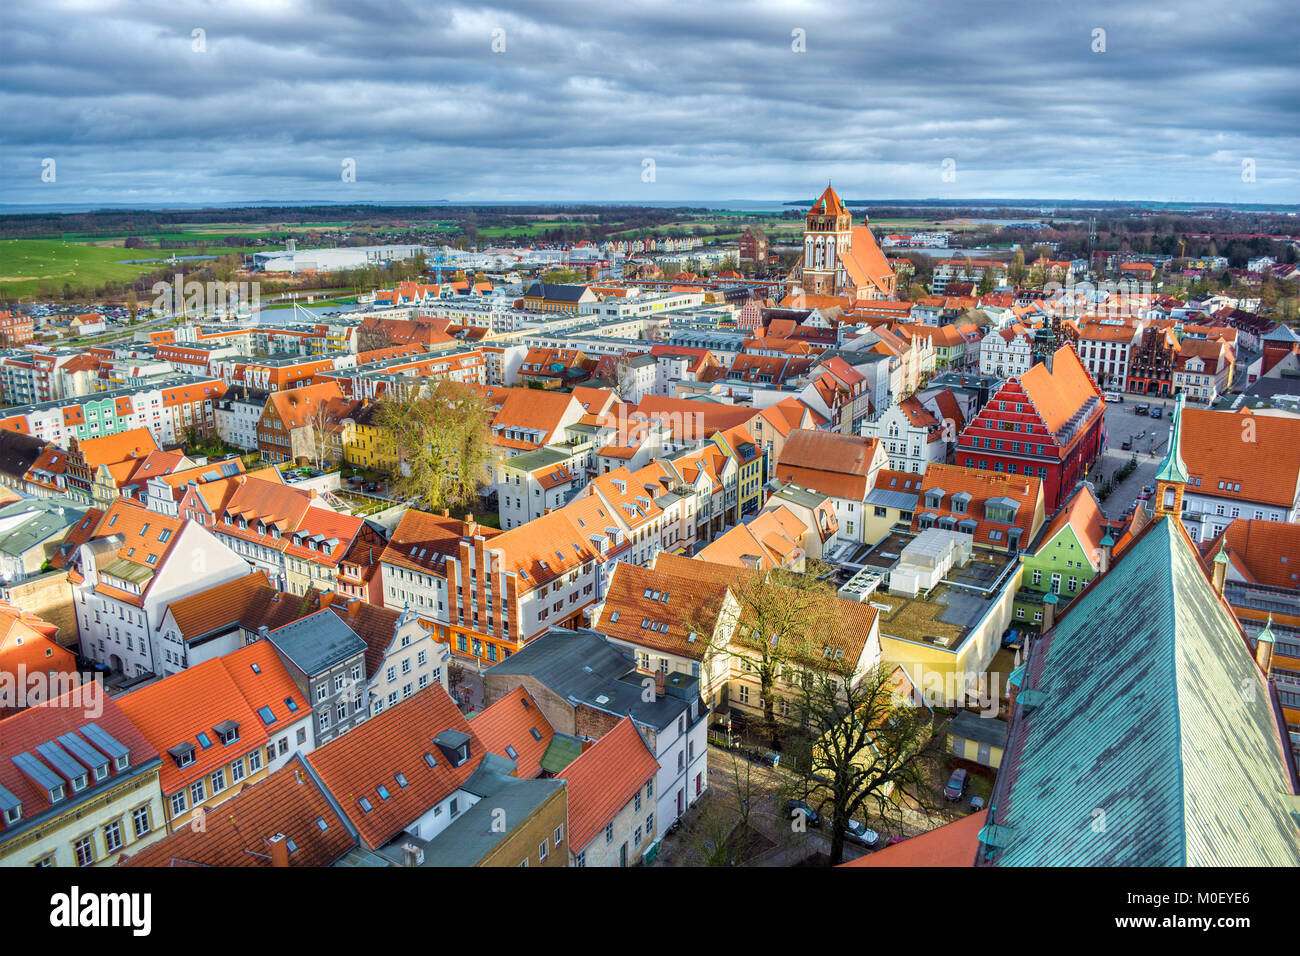 Cityscape of Greifswald (Germany), HDR-technique Stock Photo